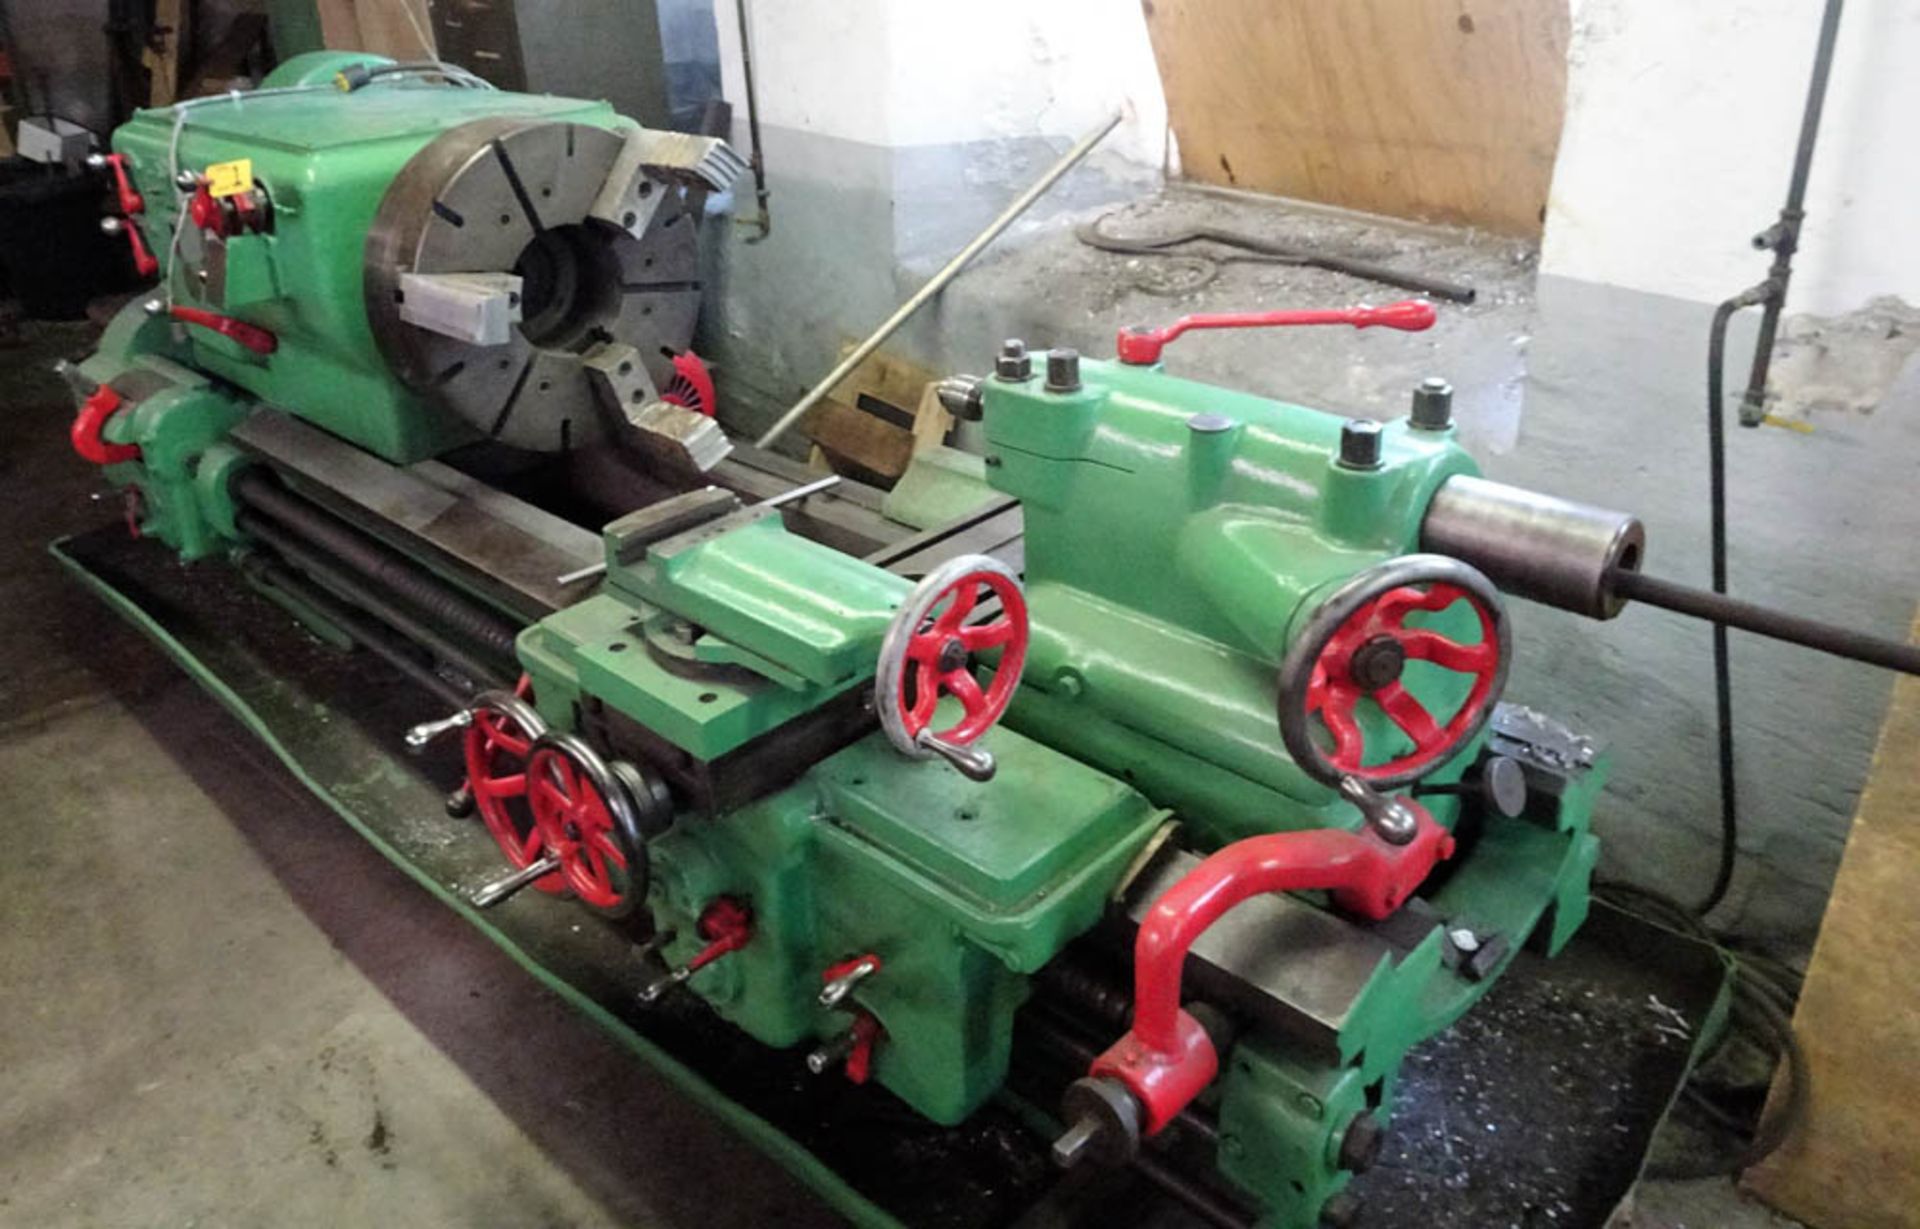 LEBLOND GEAR HEAD ENGINE LATHE WITH 24" 3-JAW CHUCK, 72" BED, 30" SWING, 44" CENTER - Image 4 of 4